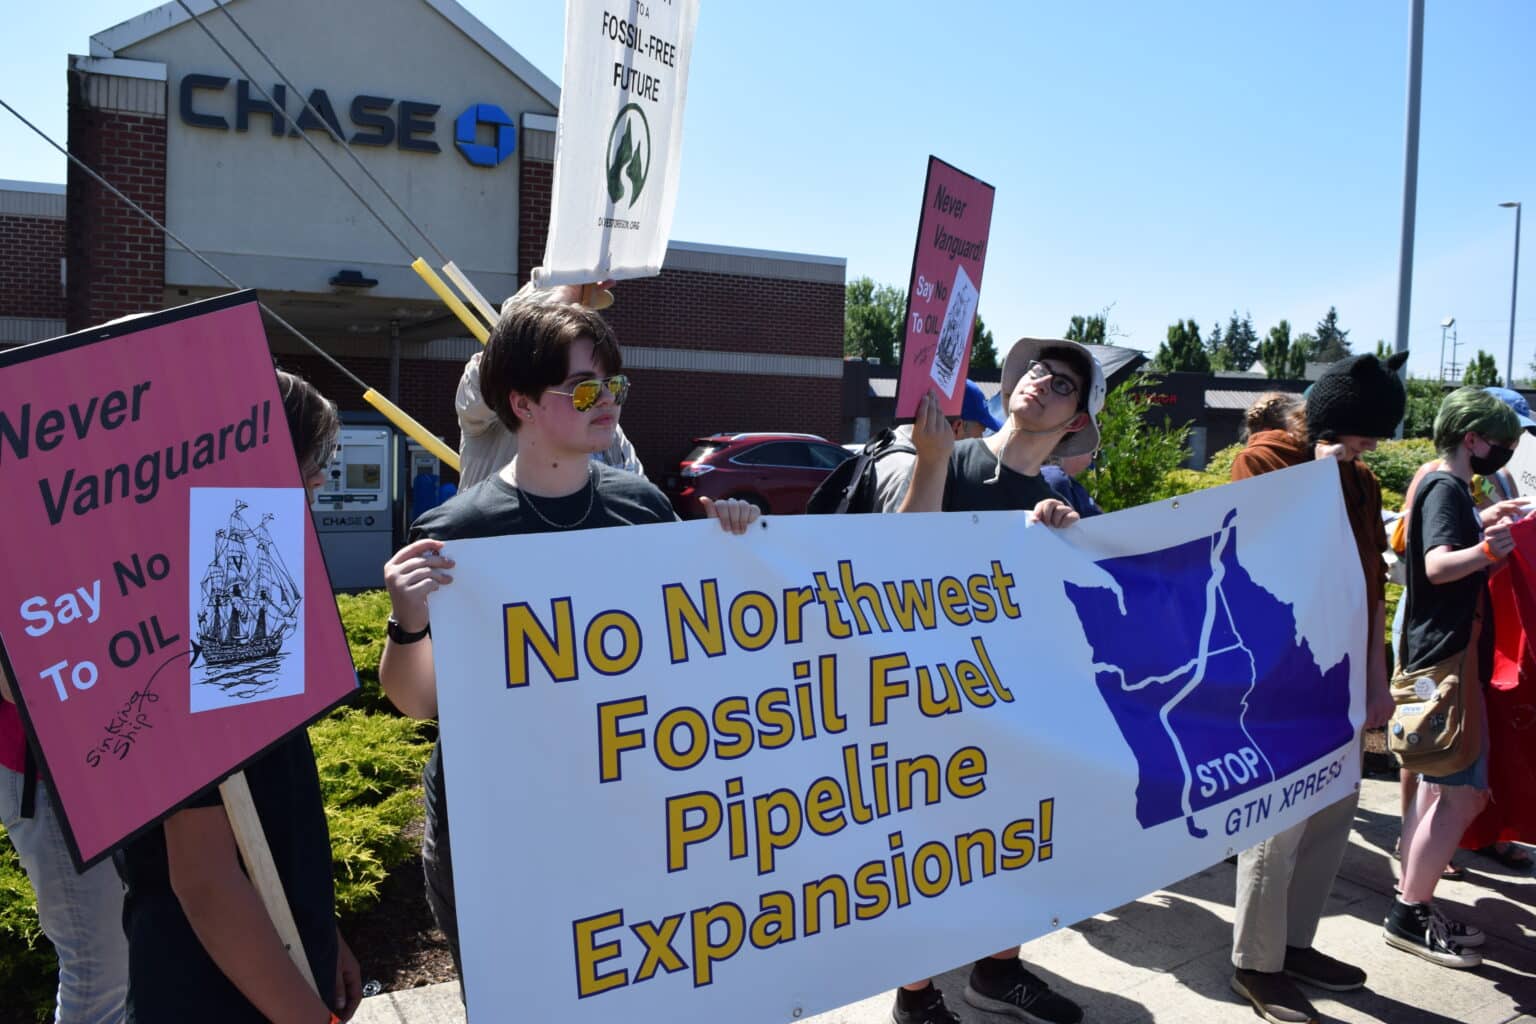 Protestors in front of a Chase Bank hold a sign reading "No Northwest Fossil Fuel Pipeline Expansions! Stop GTN Xpress"